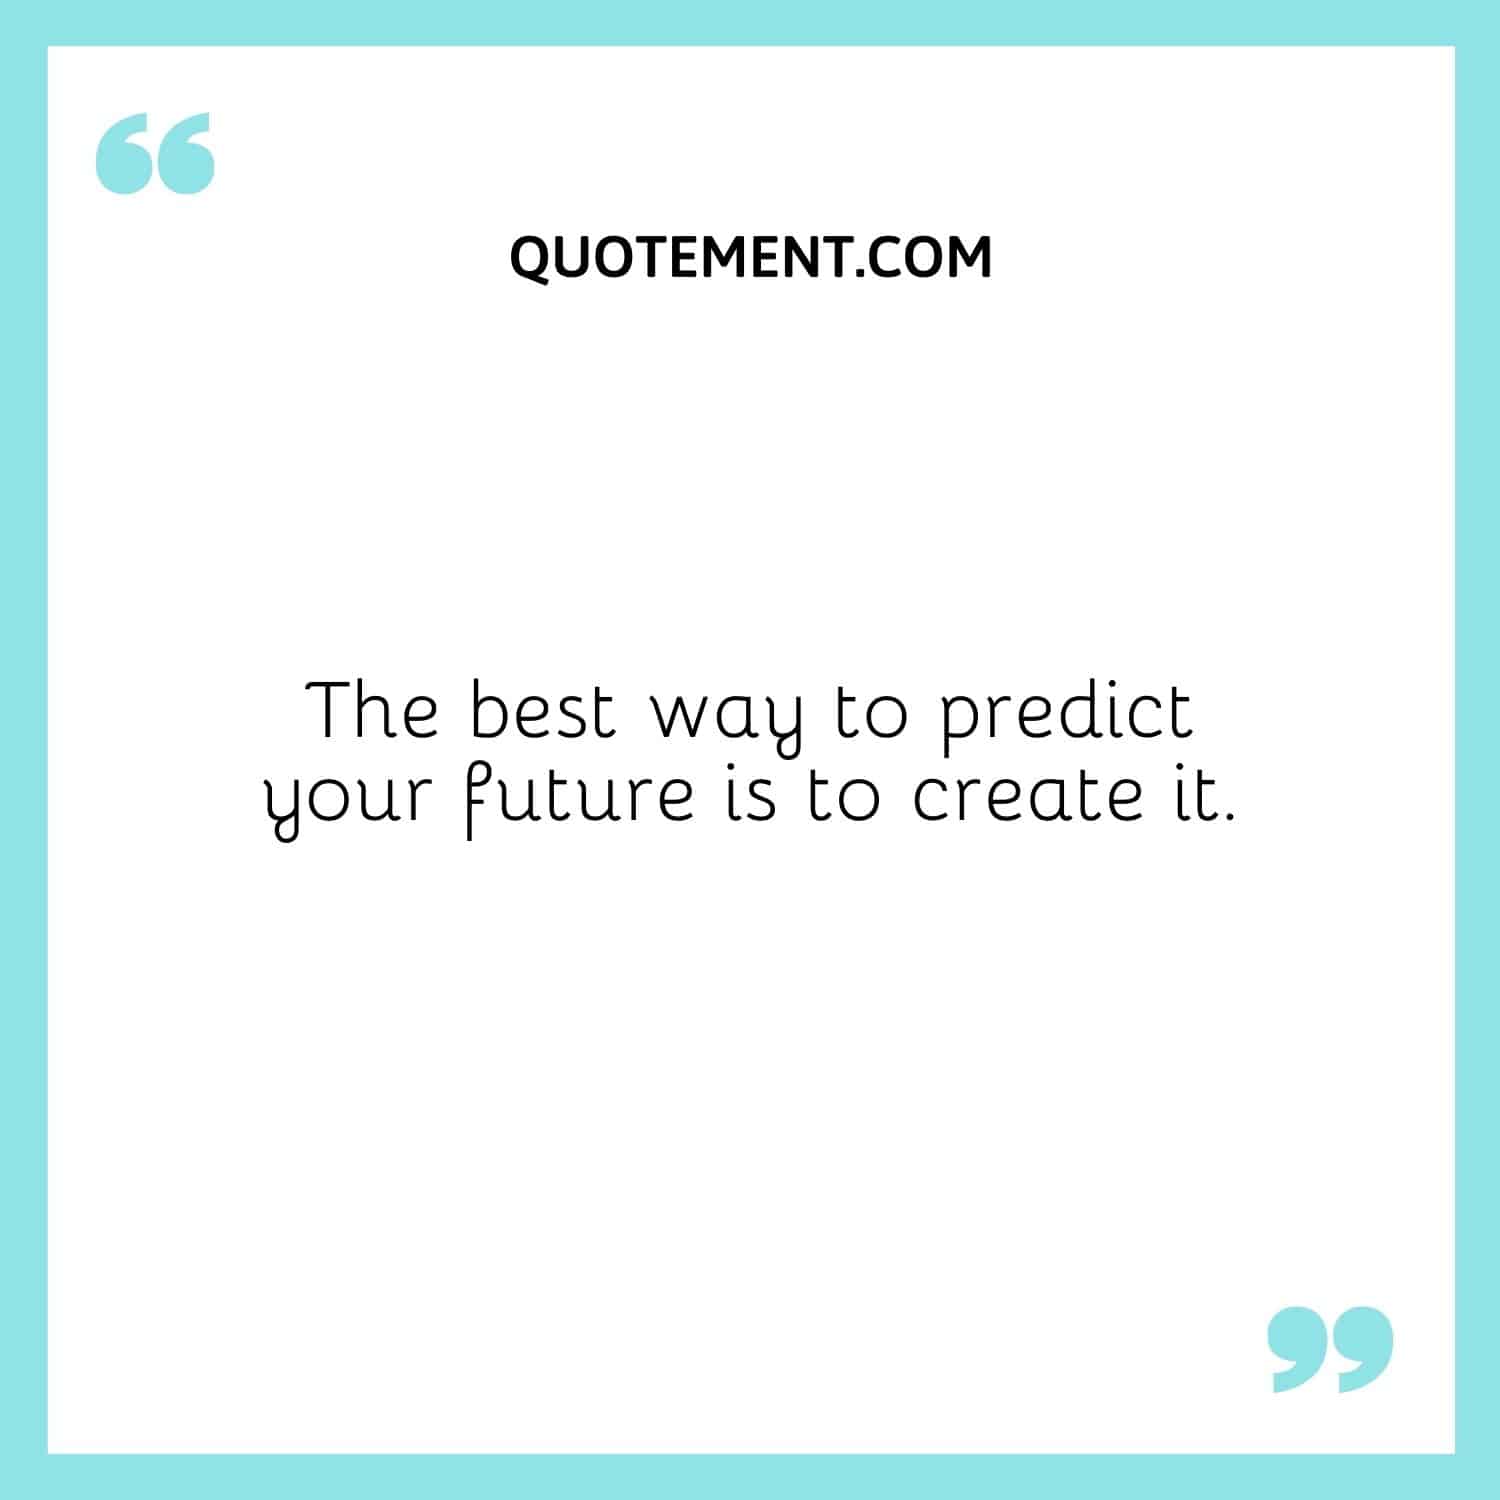 The best way to predict your future is to create it.